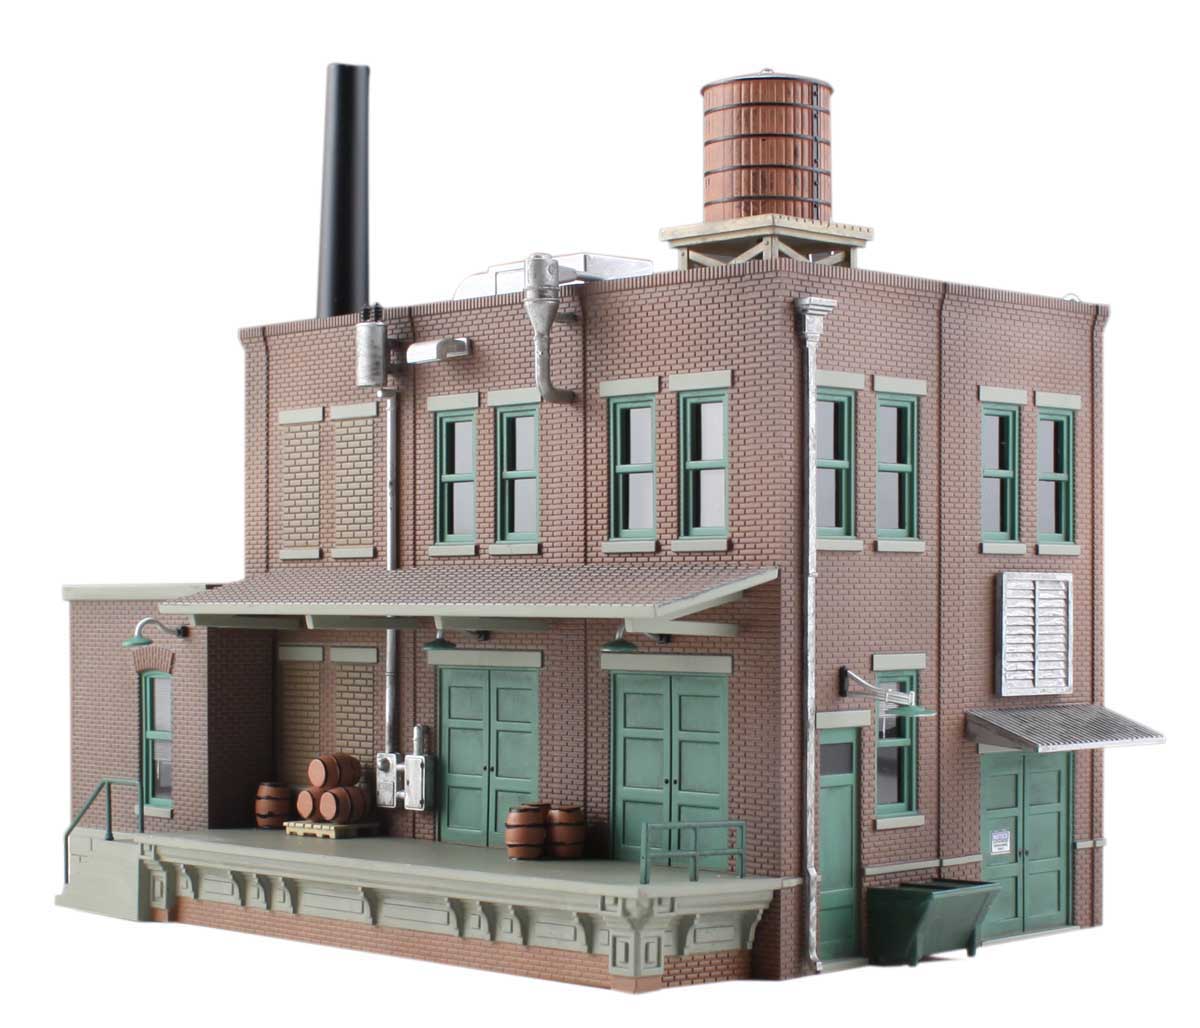 Clyde & Dale's Barrel Factory - HO Scale - This old beer barrel factory features a definitive architectural design and natural weathering